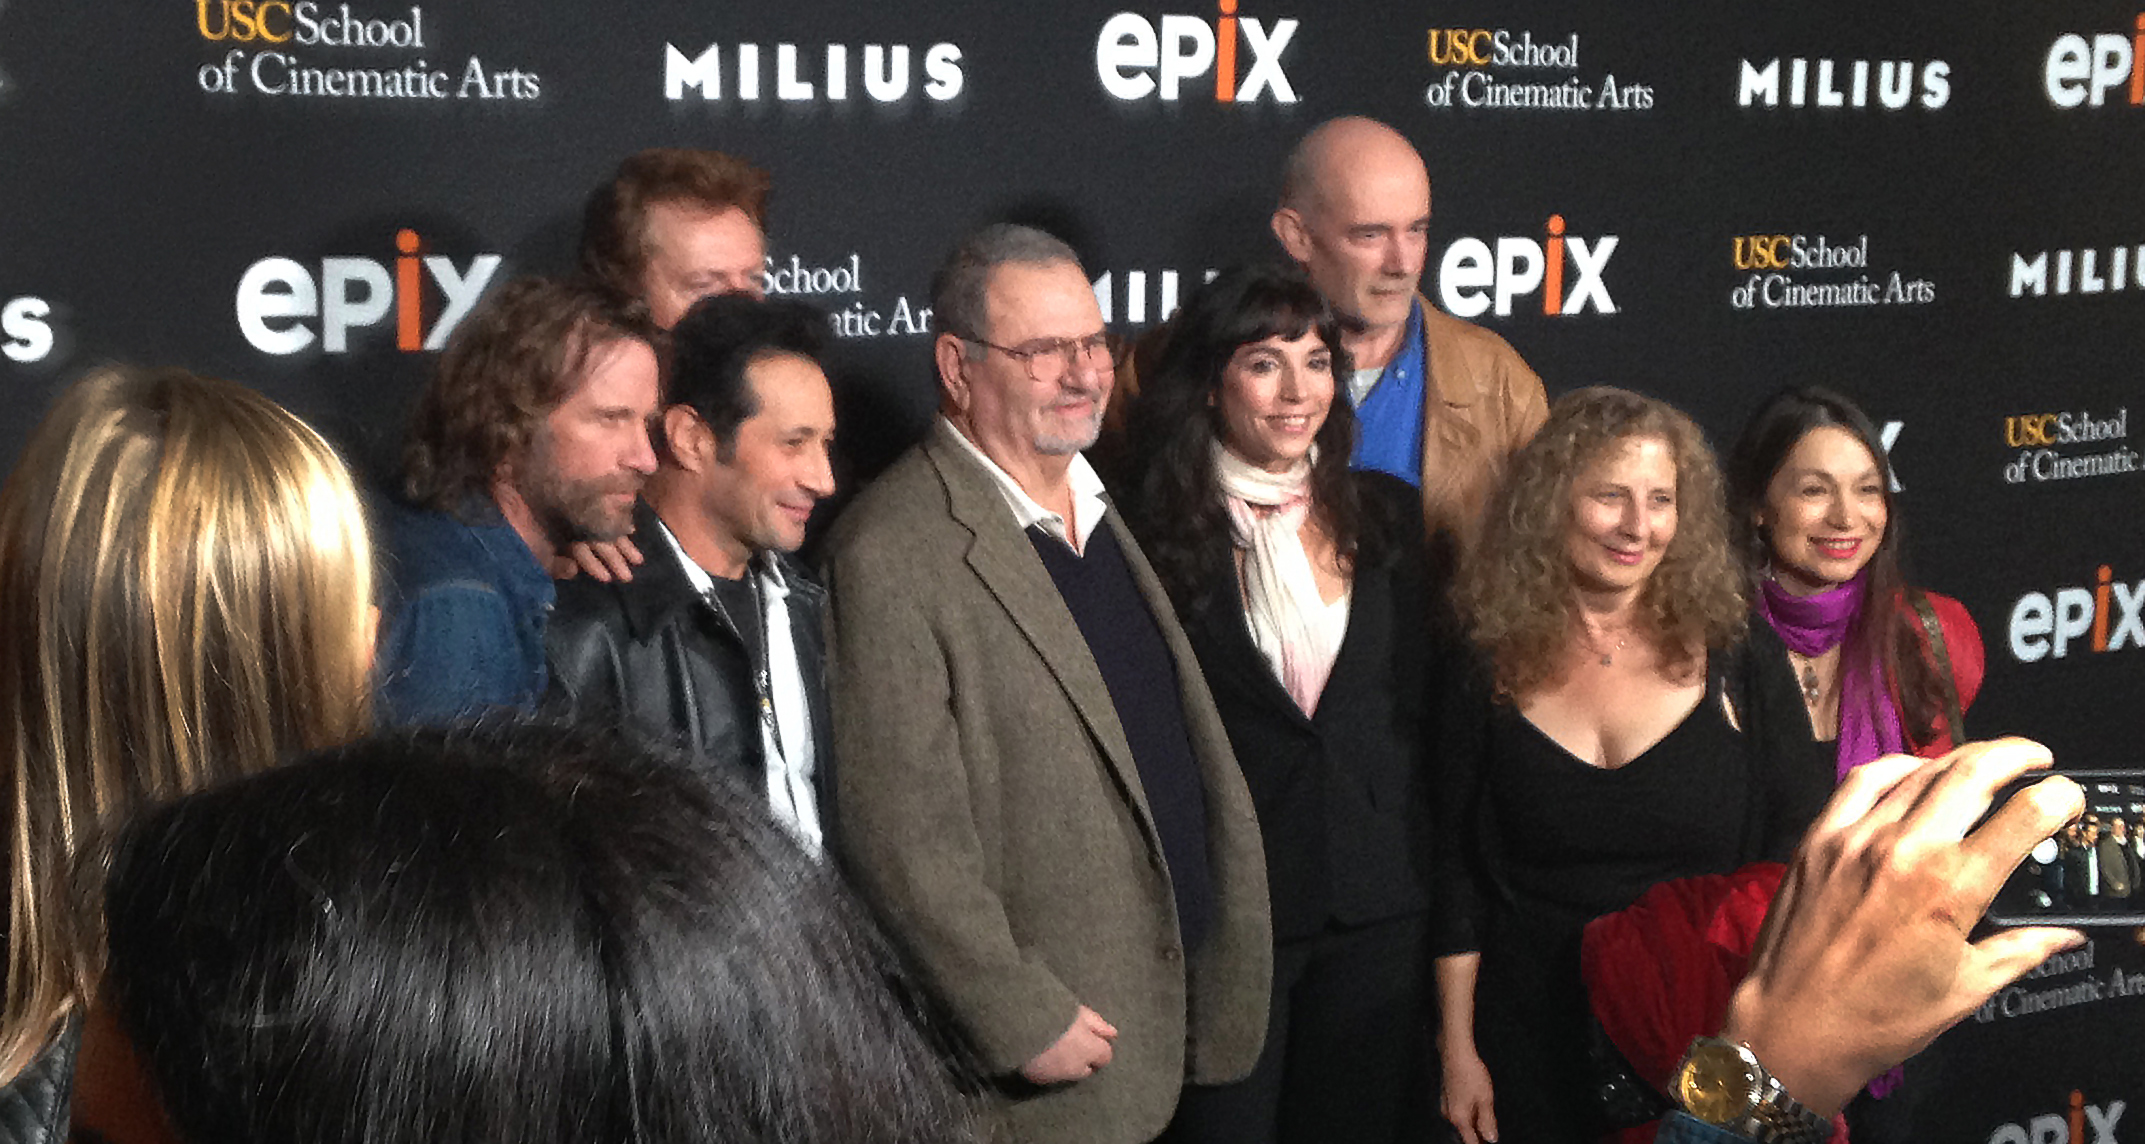 Ian Vernon on red carpet at Premiere of MILIUS documentary. Los Angeles 9/1/14